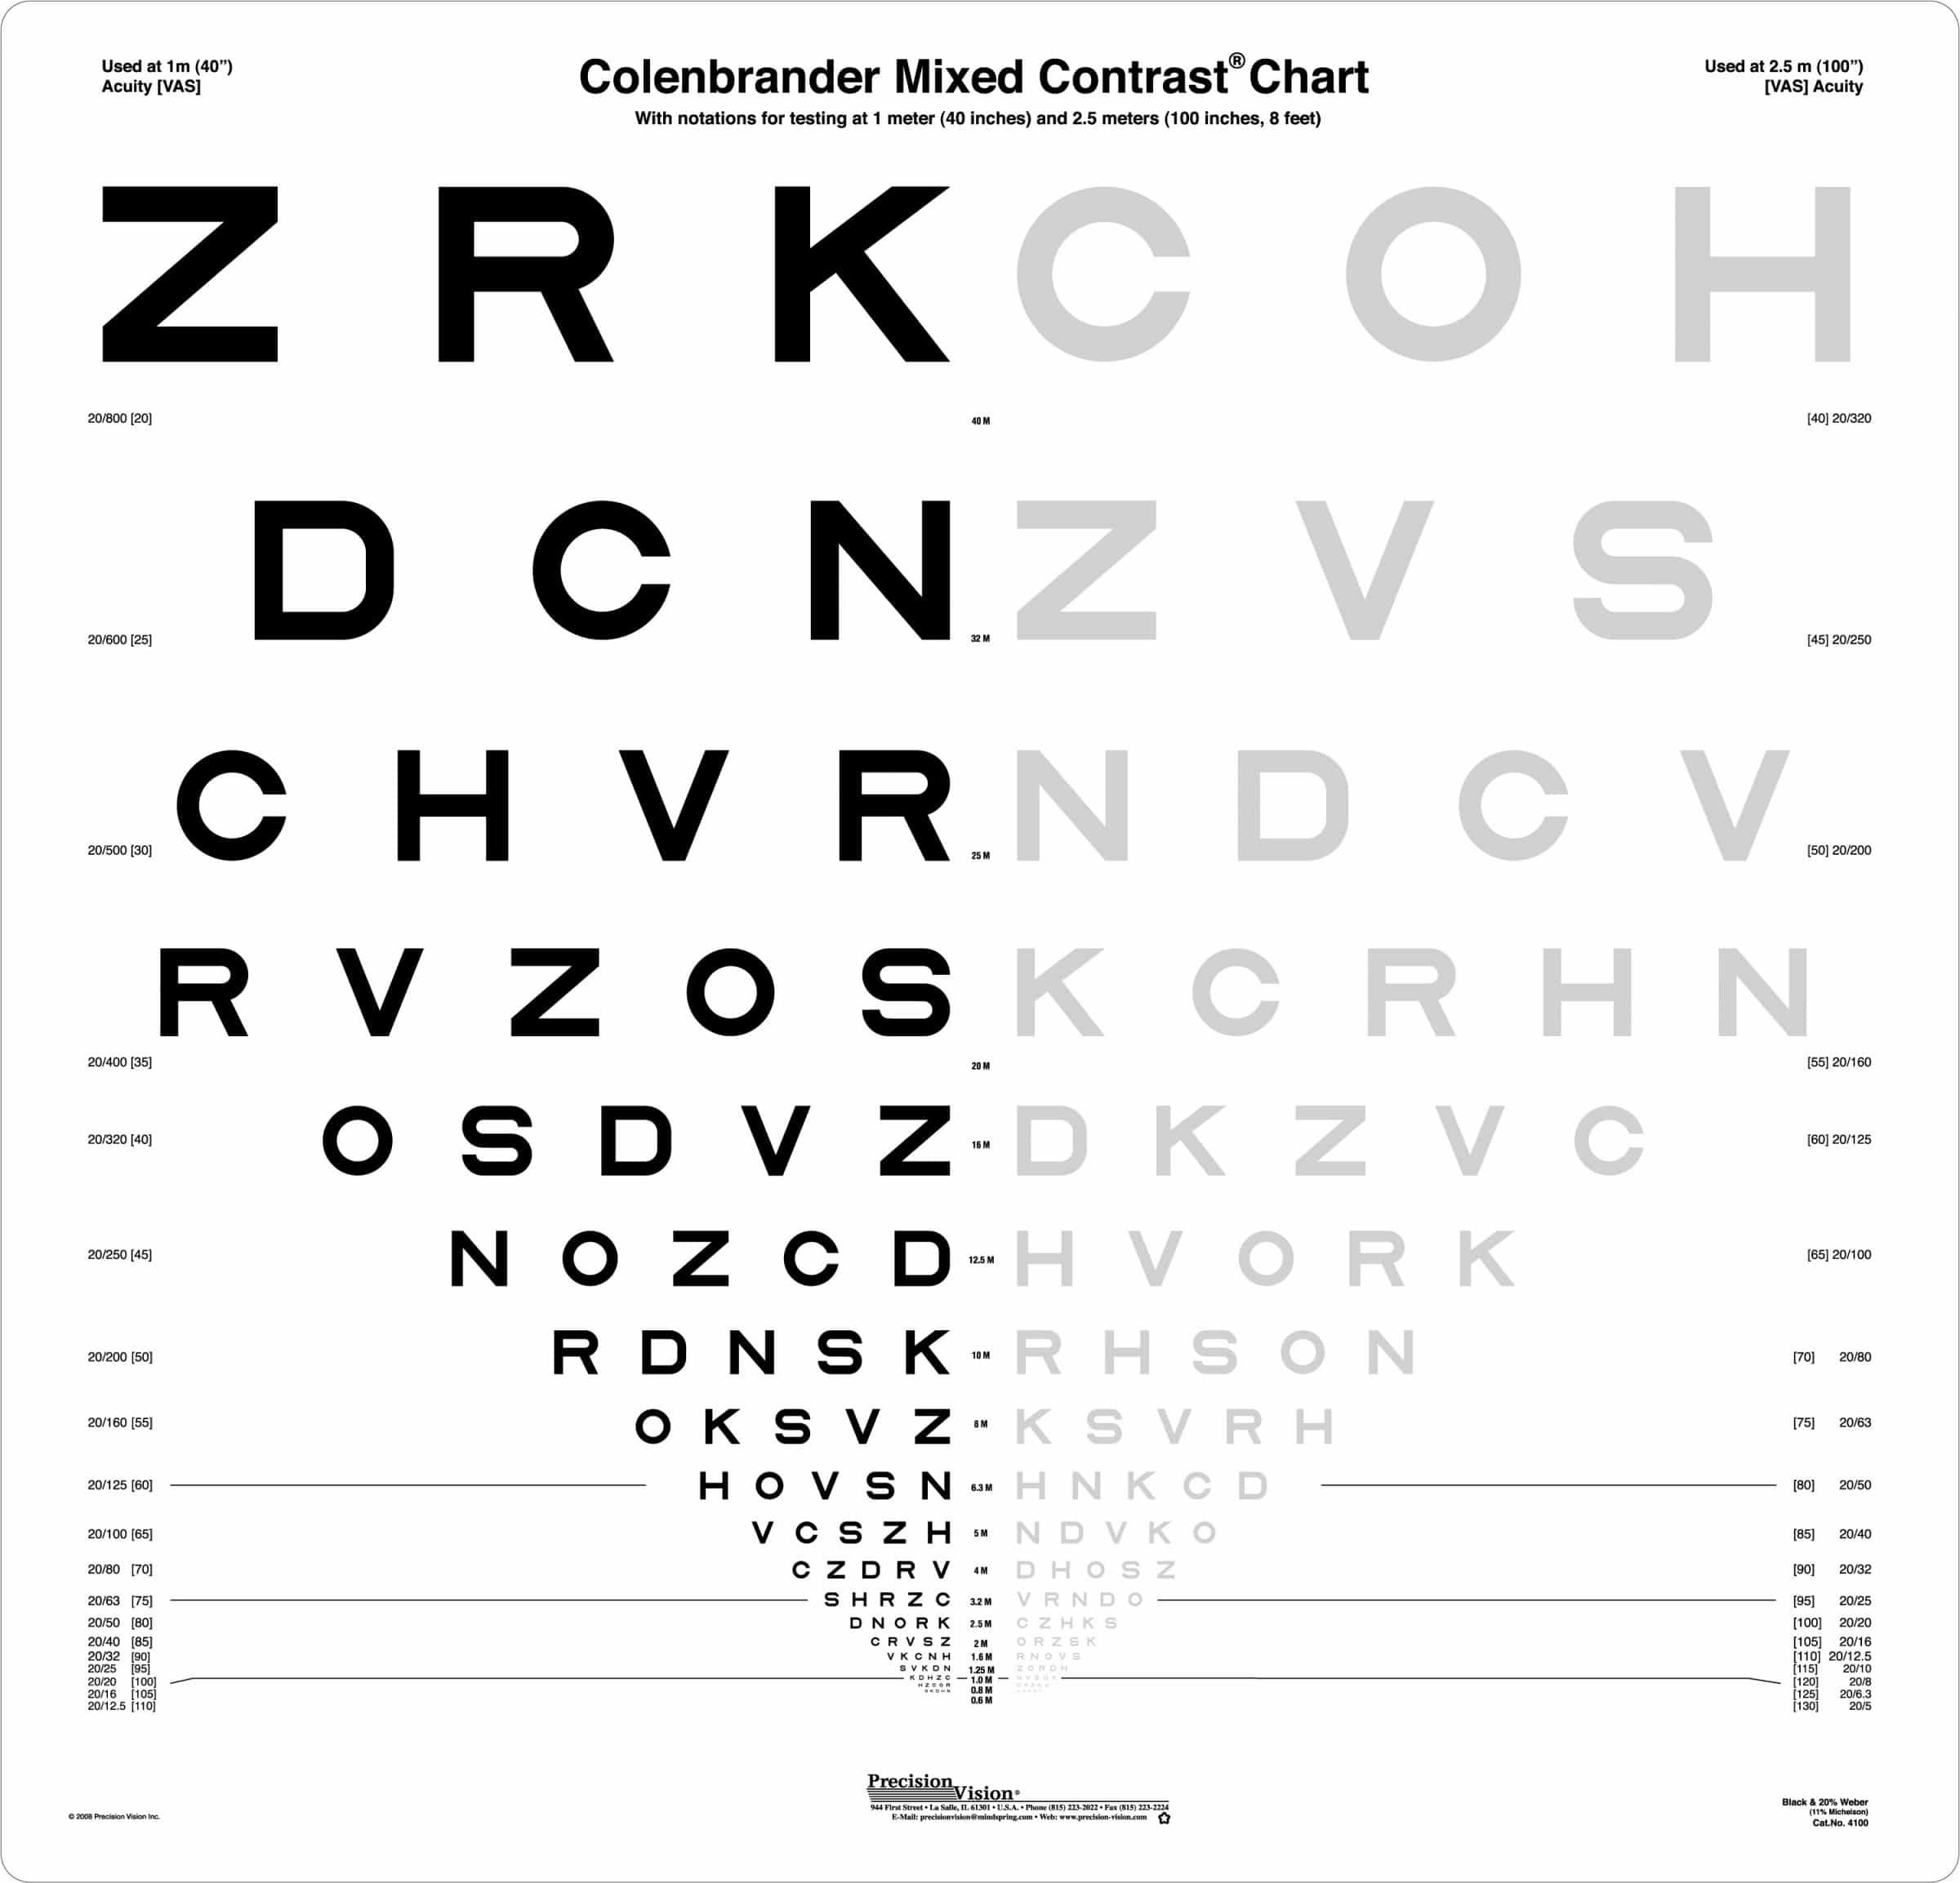 Mixed Contrast Chart